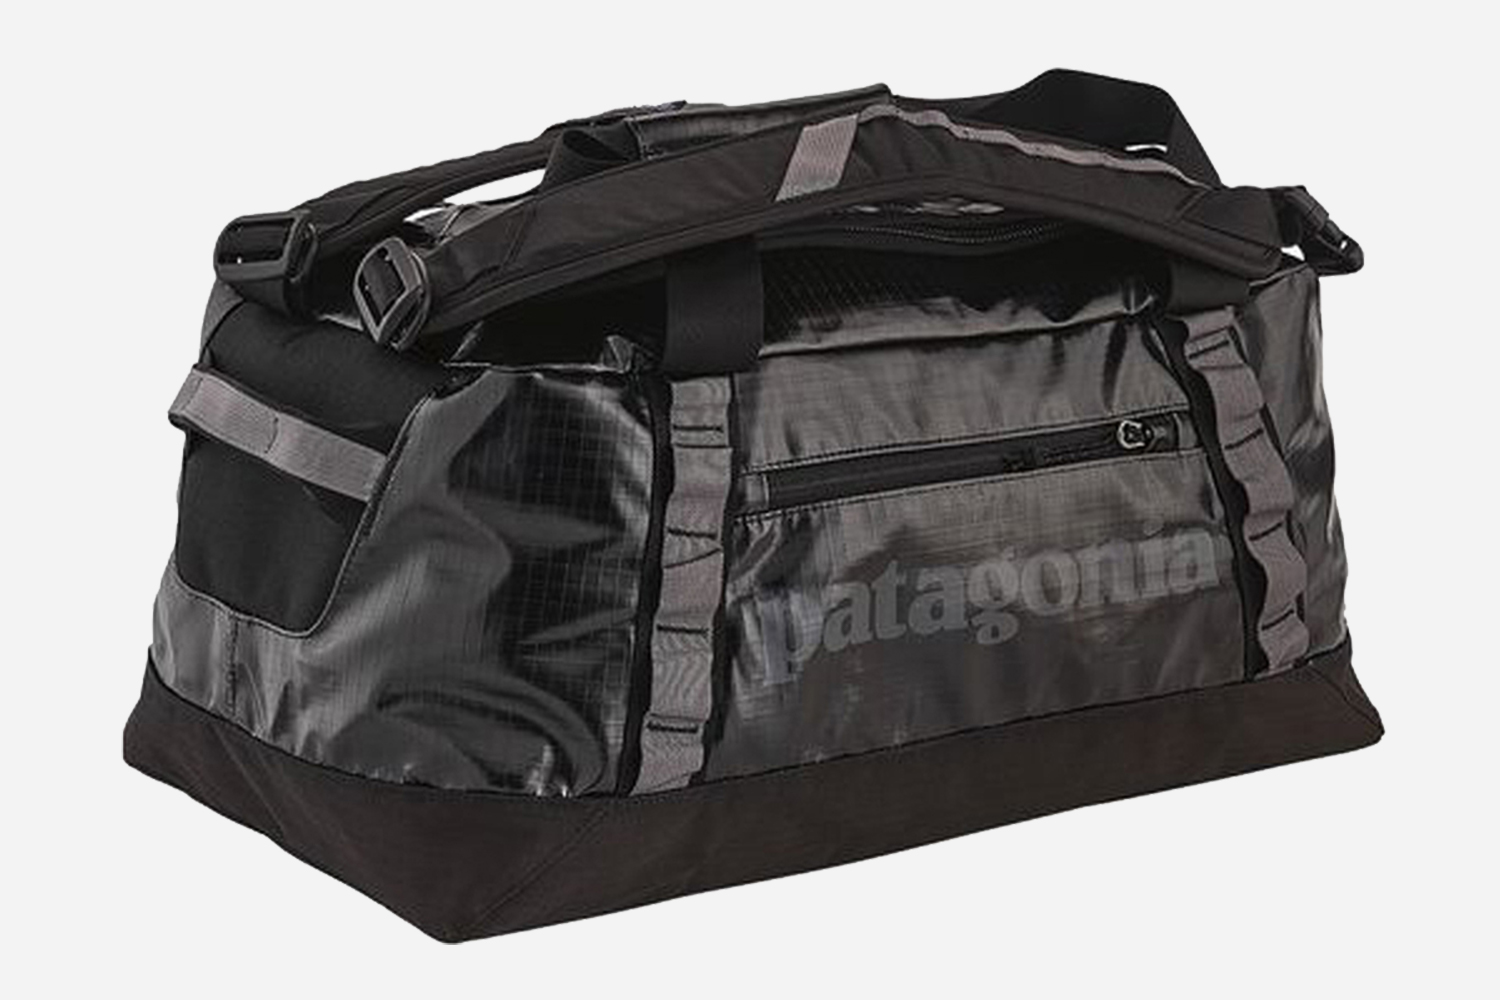 Sale on Patagonia Black Hole Duffels at REI